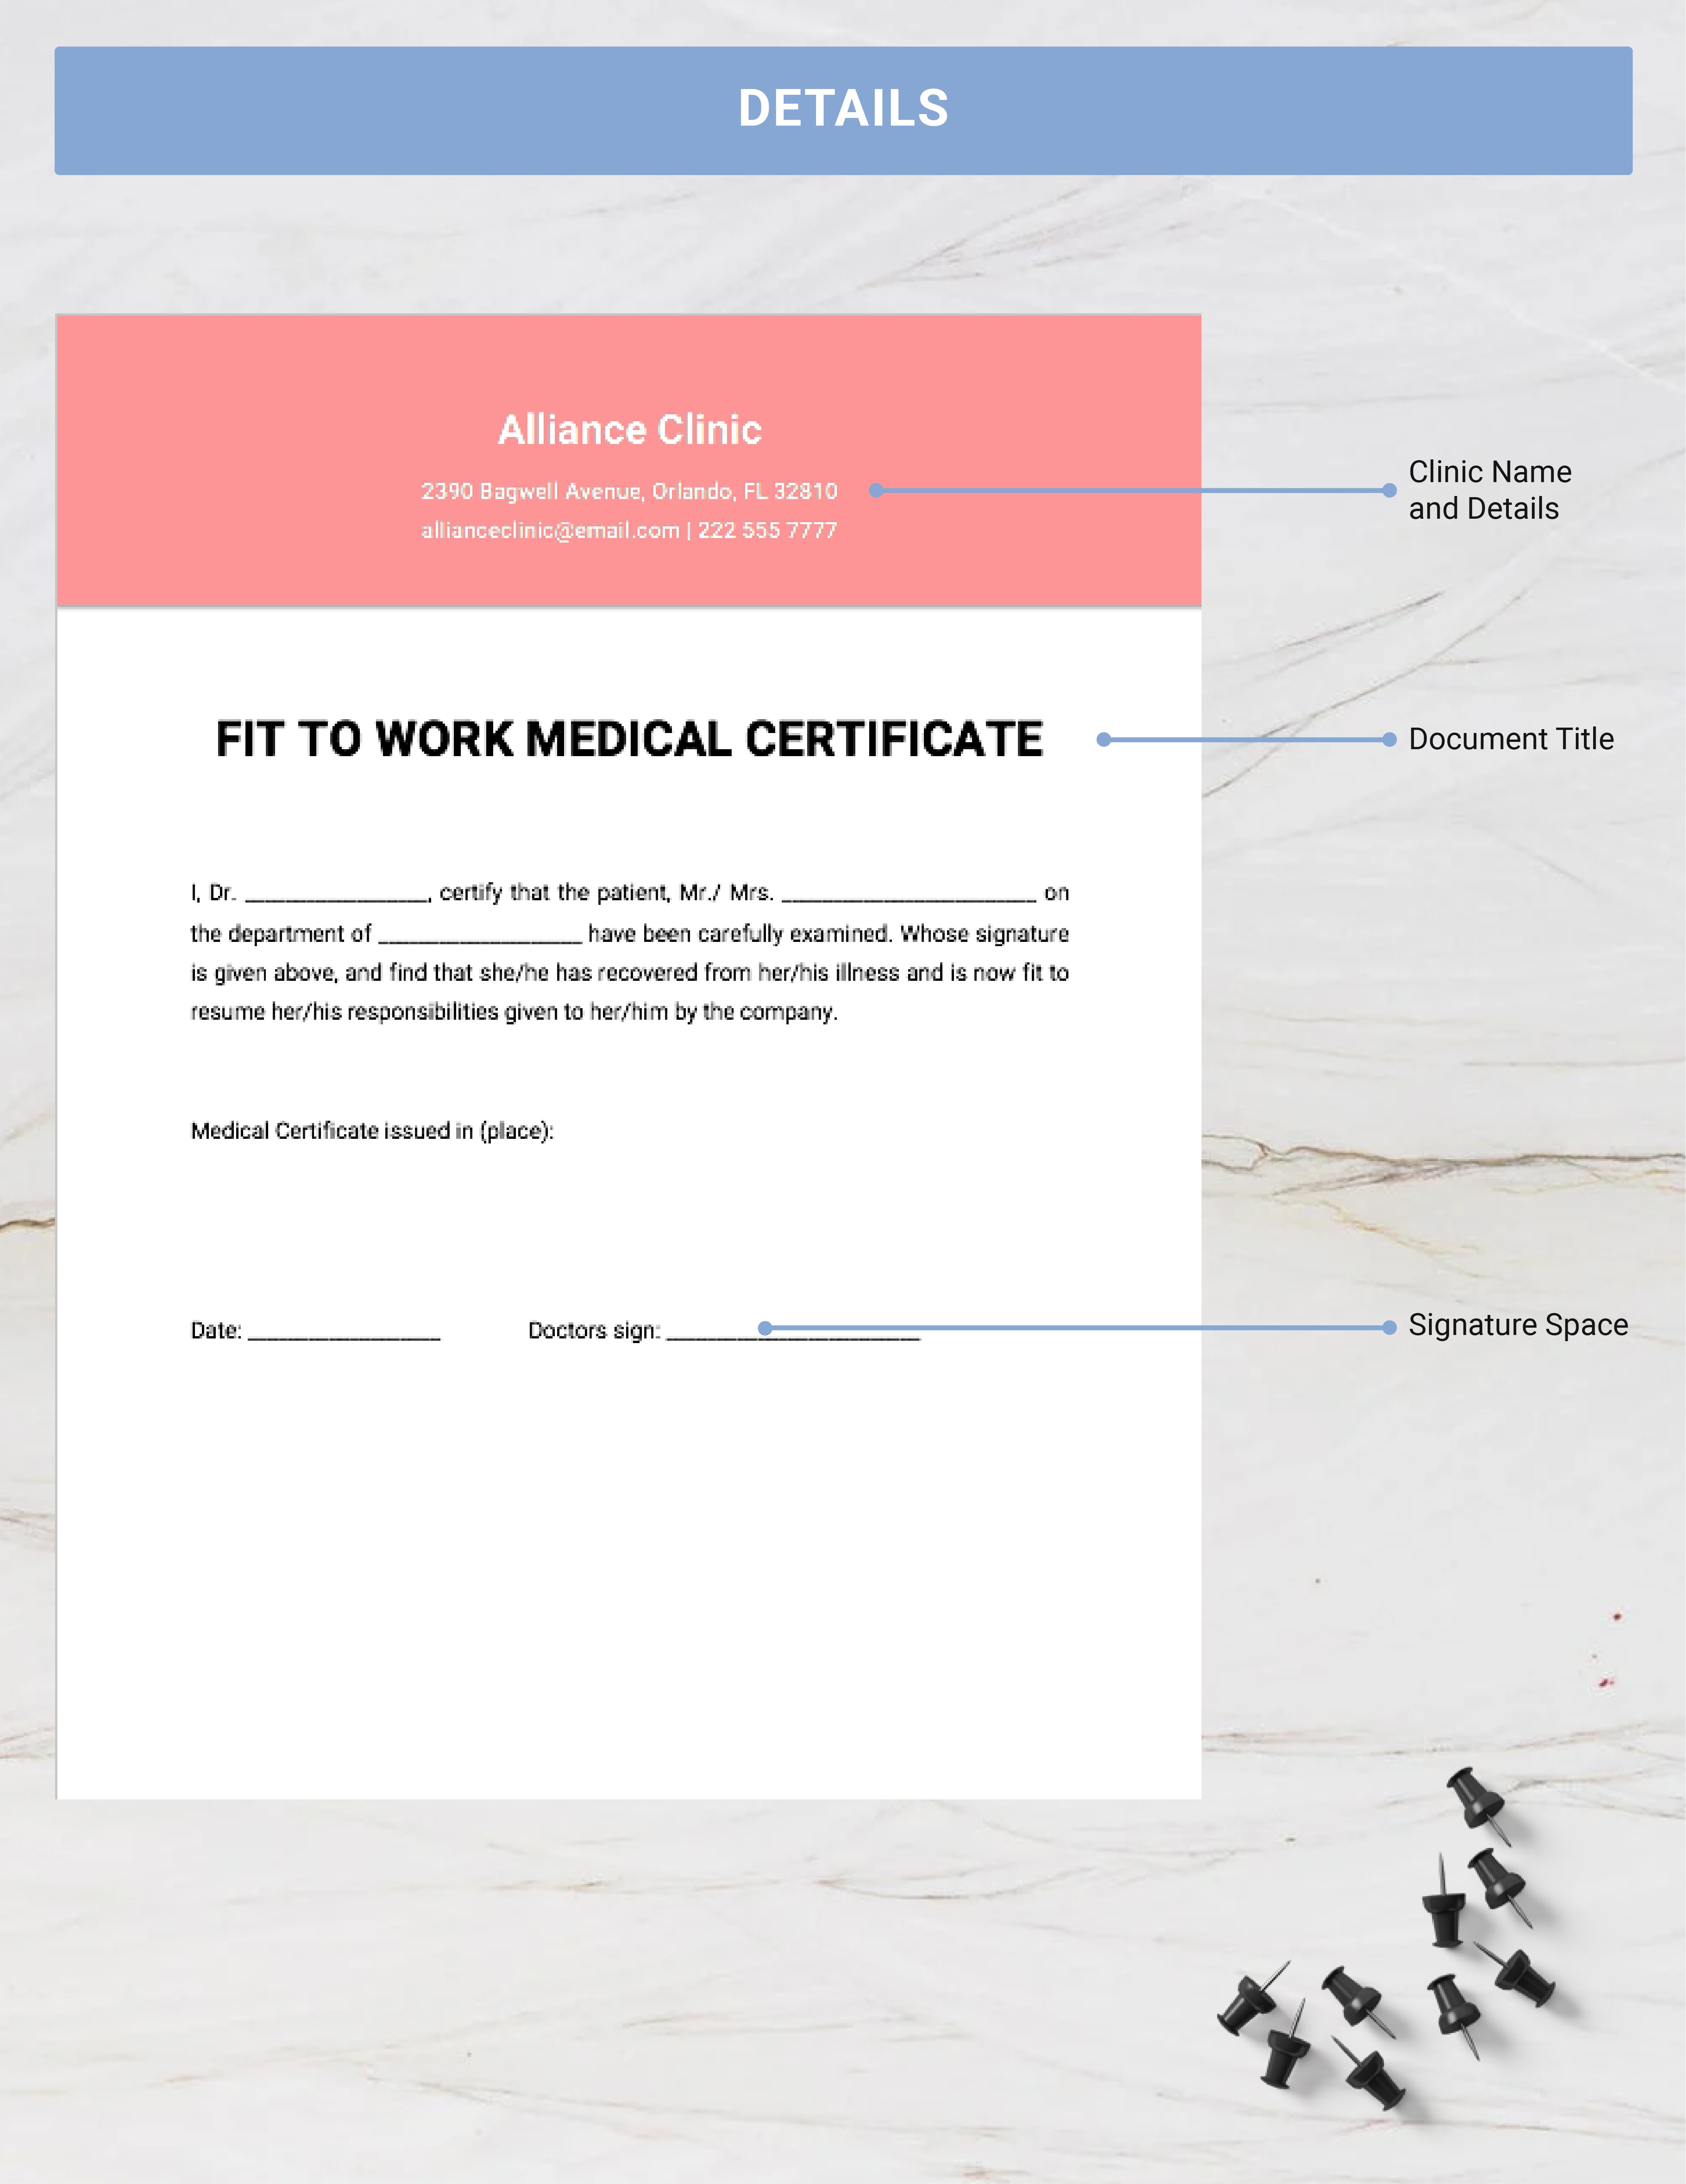 fit-to-work-medical-certificate-template-google-docs-word-apple